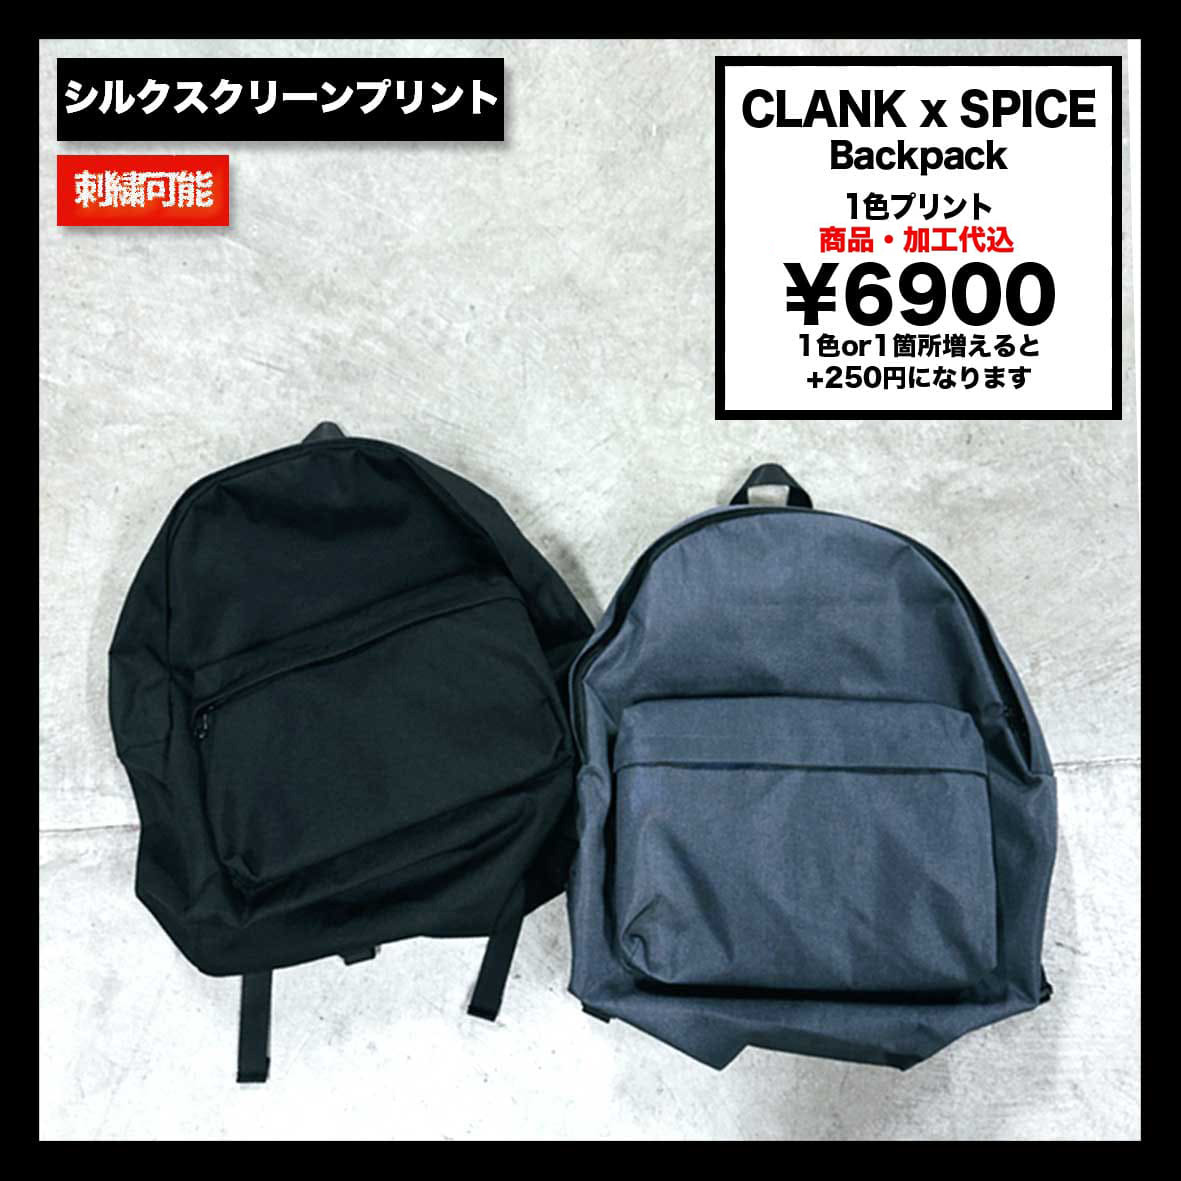 CLANK x SPICE Backpack (品番CL03)